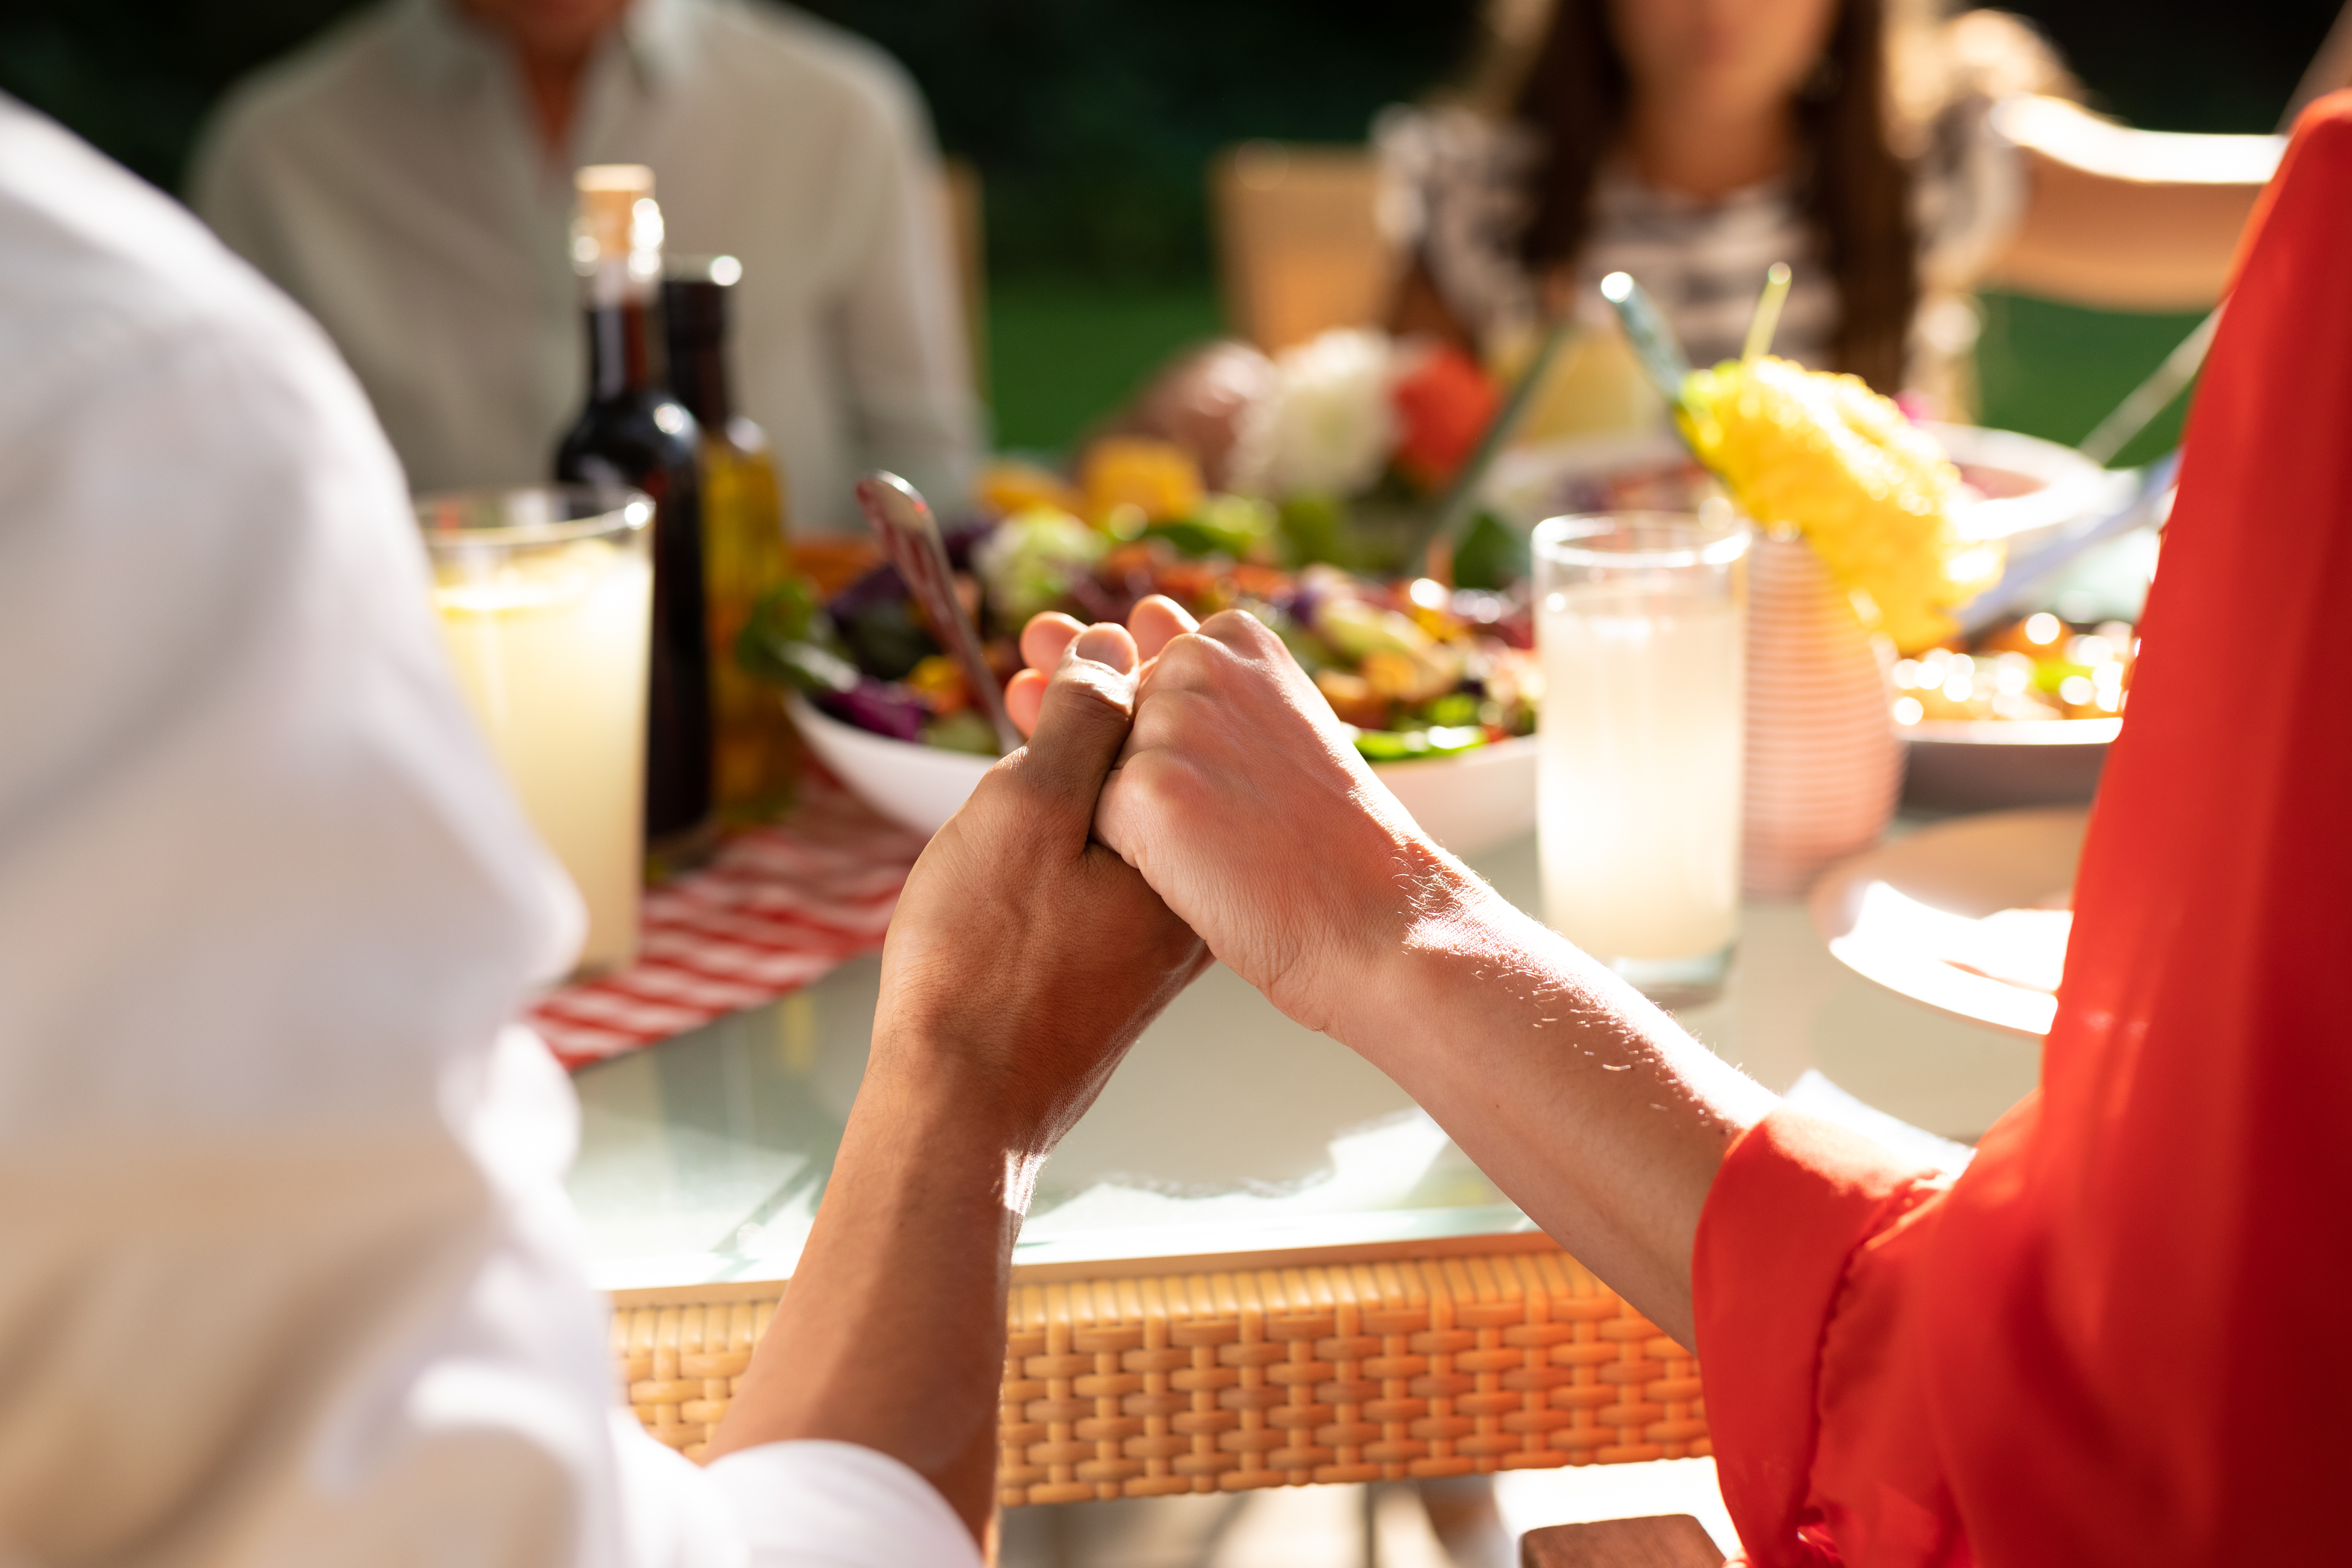 Rear view mid section of a Caucasian couple sitting outside with their family at a dinner table set for a meal, holding hands together in prayer. Family enjoying time at home, lifestyle concept